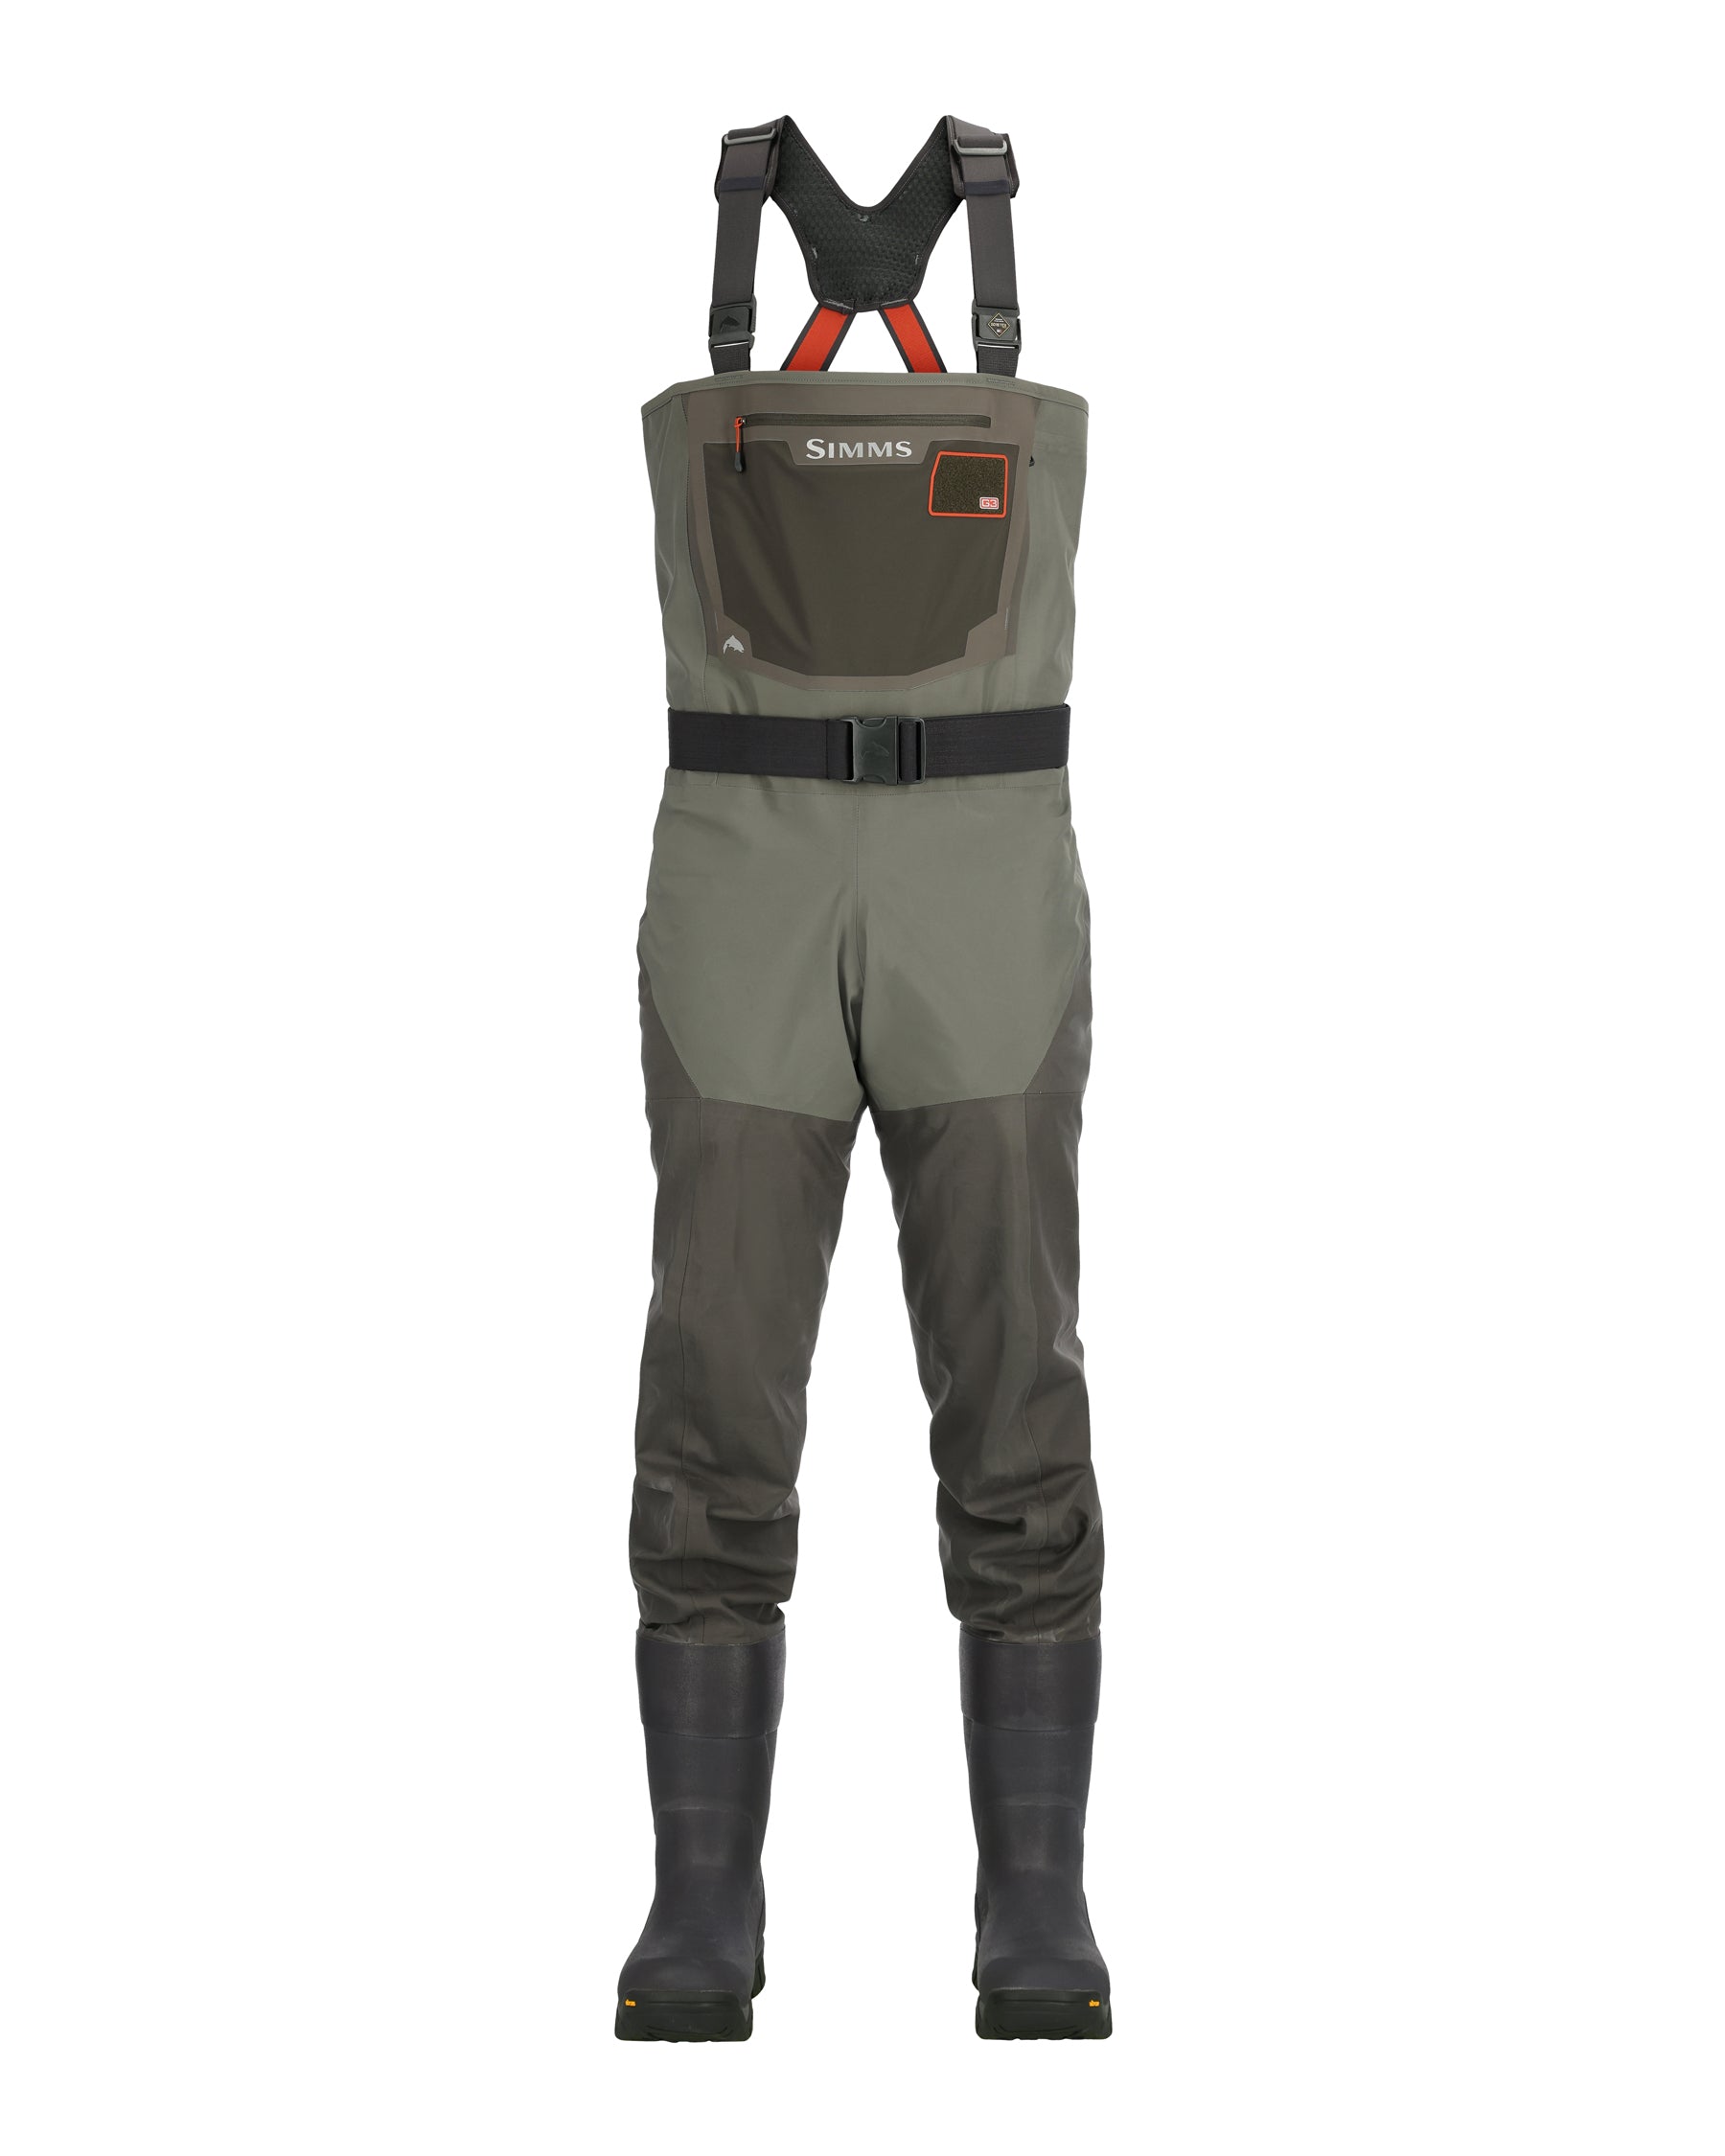 M's G3 Guide Waders - Bootfoot - Vibram Sole | Simms Fishing 